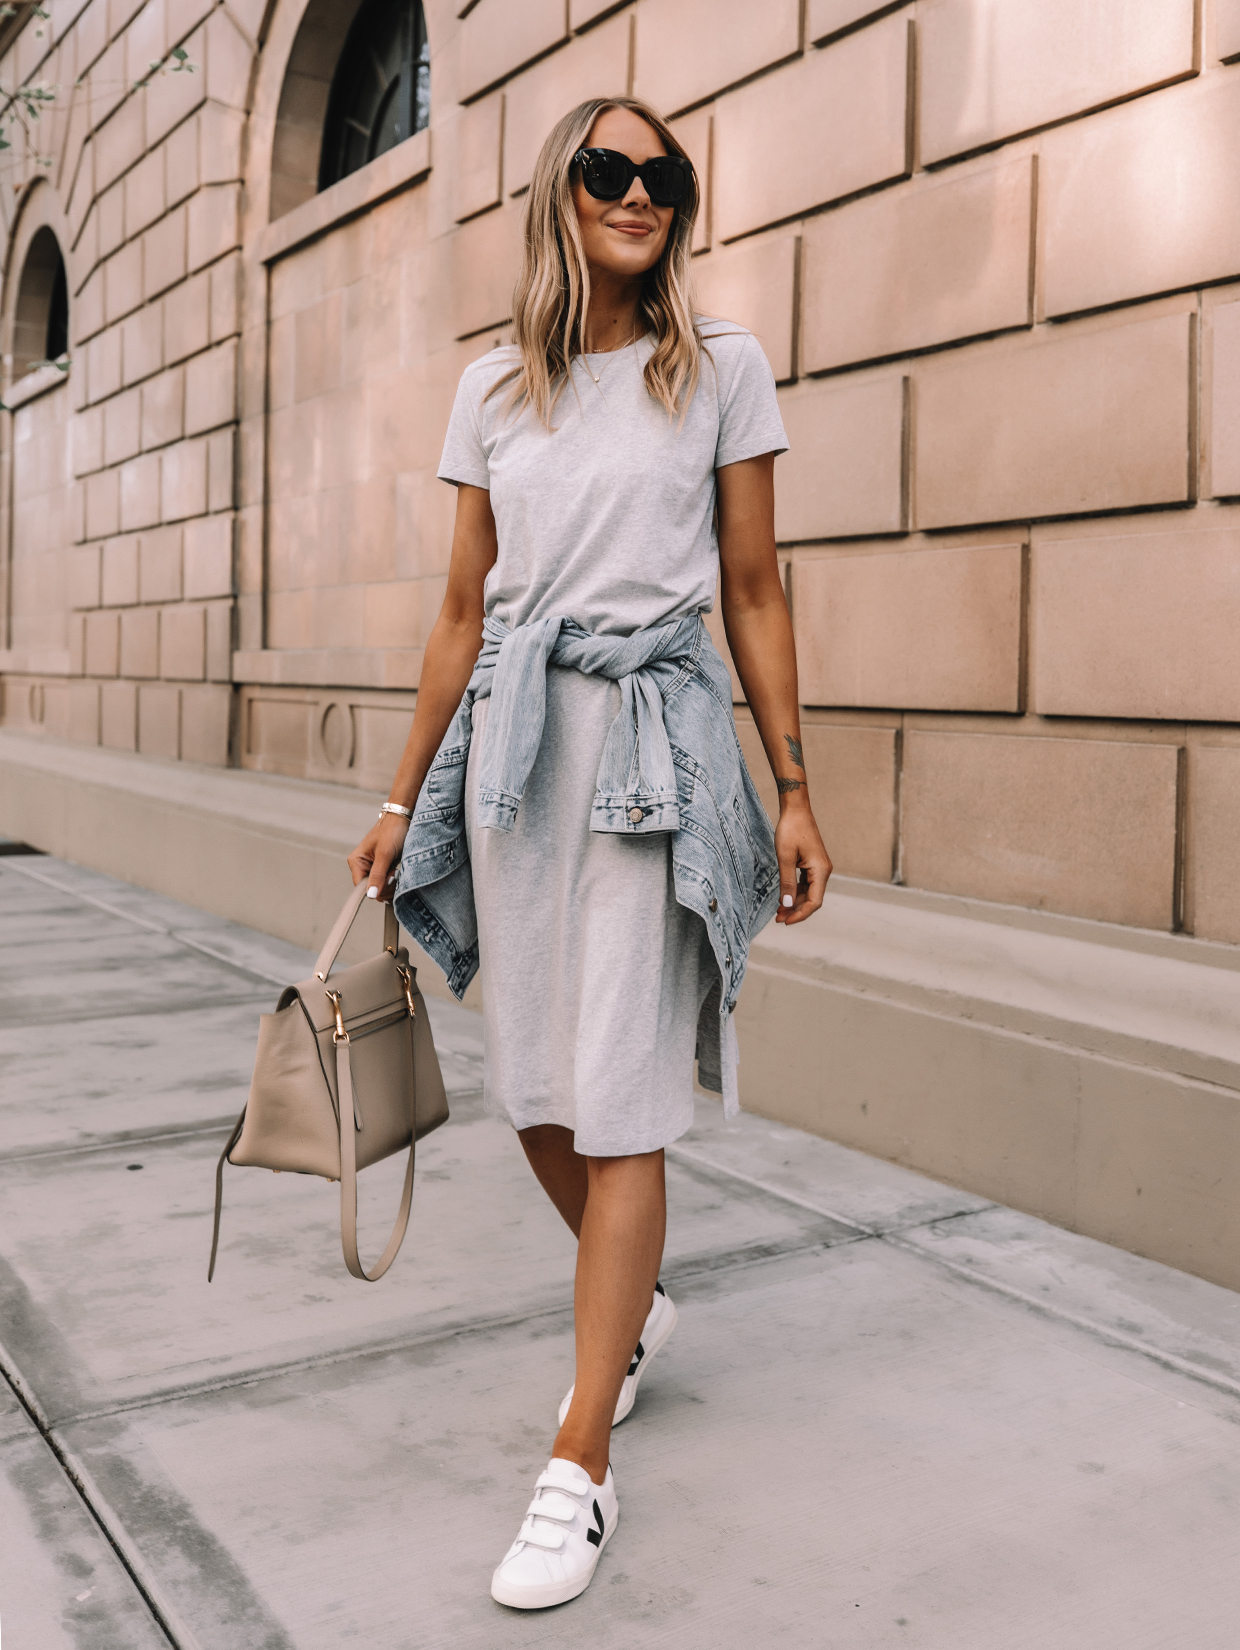 T-Shirt Dresses Are A Summer Essential - Here's How to Style Them